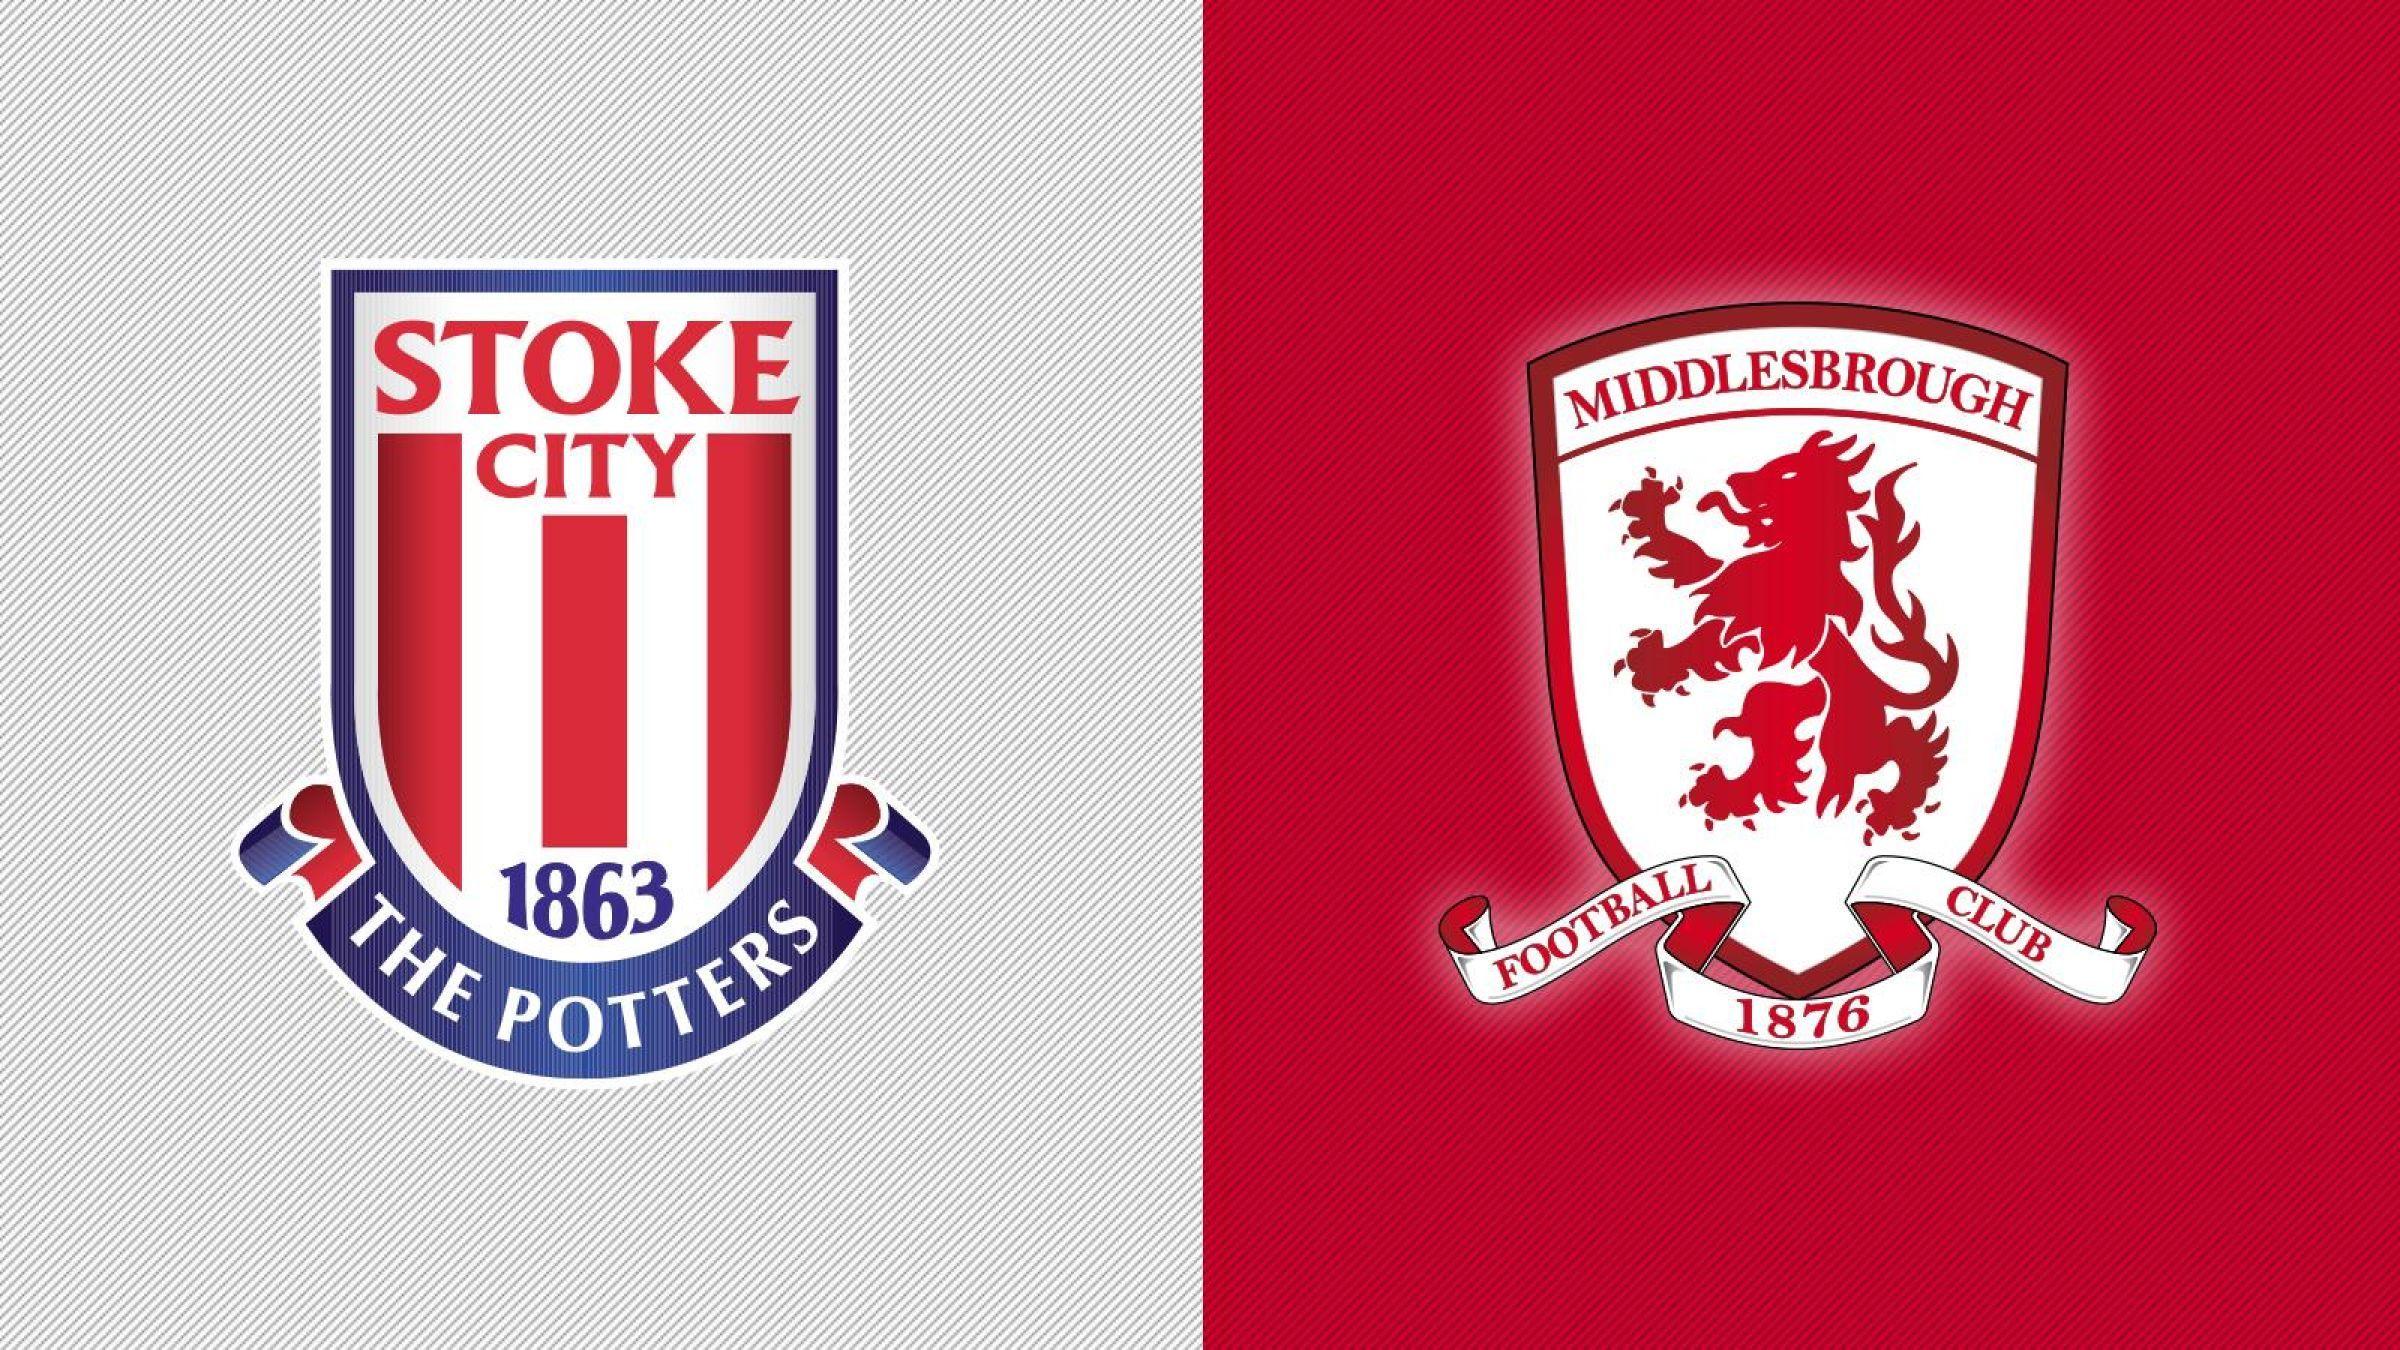 Stoke City Logo - Beamback: Sold-Out Stoke City Game To Be Shown At The Riverside ...